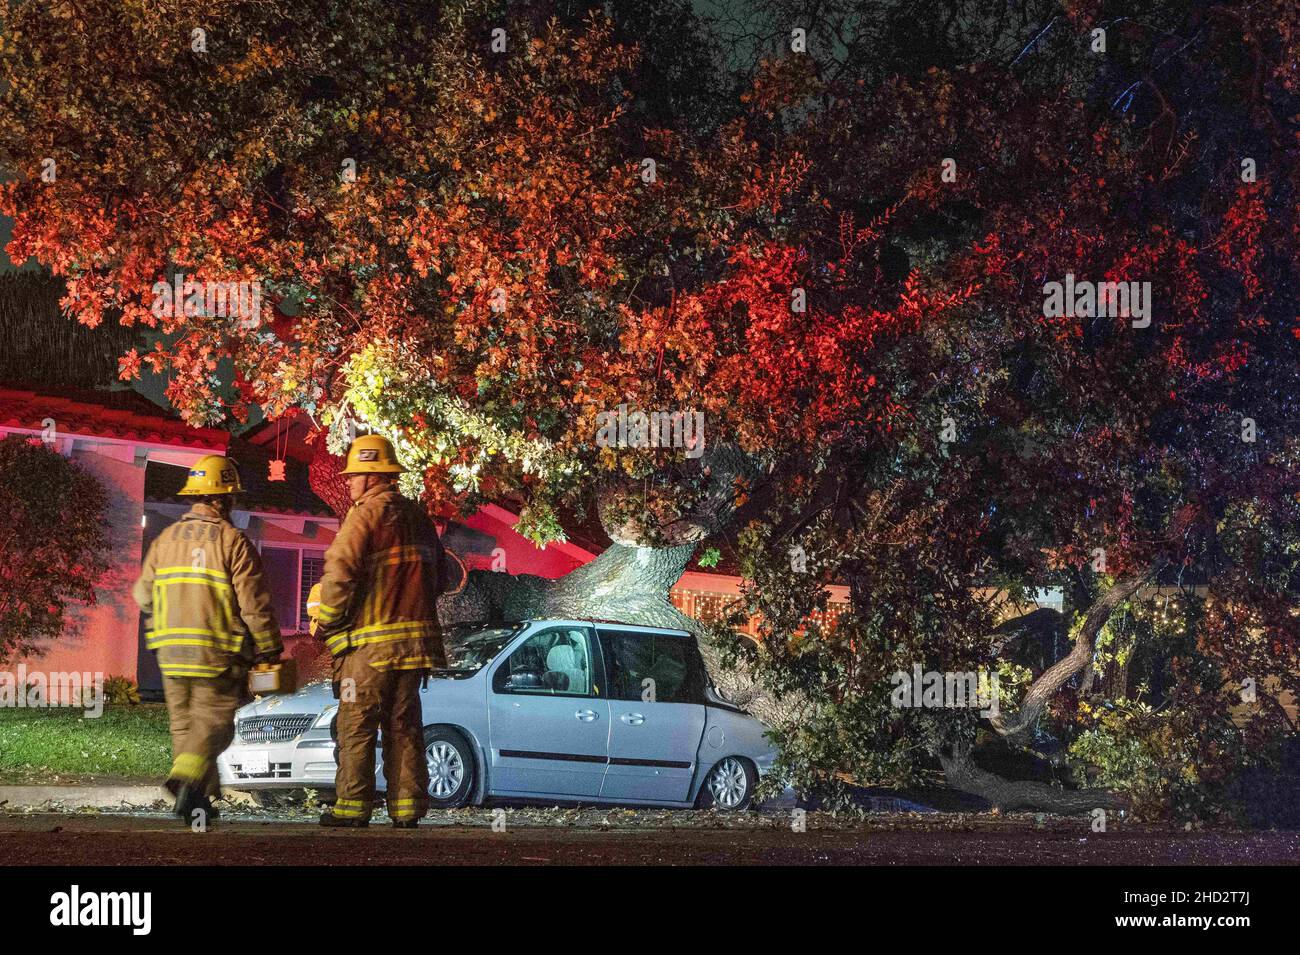 Thousand Oaks, California, USA. 30th Dec, 2021. Ventura County firefighters look over a scene where a minivan was crushed by an oak tree that fell on it during a slow-moving winter storm that soaked Southern California. No one was injured in the incident. Credit: K.C. Alfred/ZUMA Wire/ZUMAPRESS.com/Alamy Live News Stock Photo